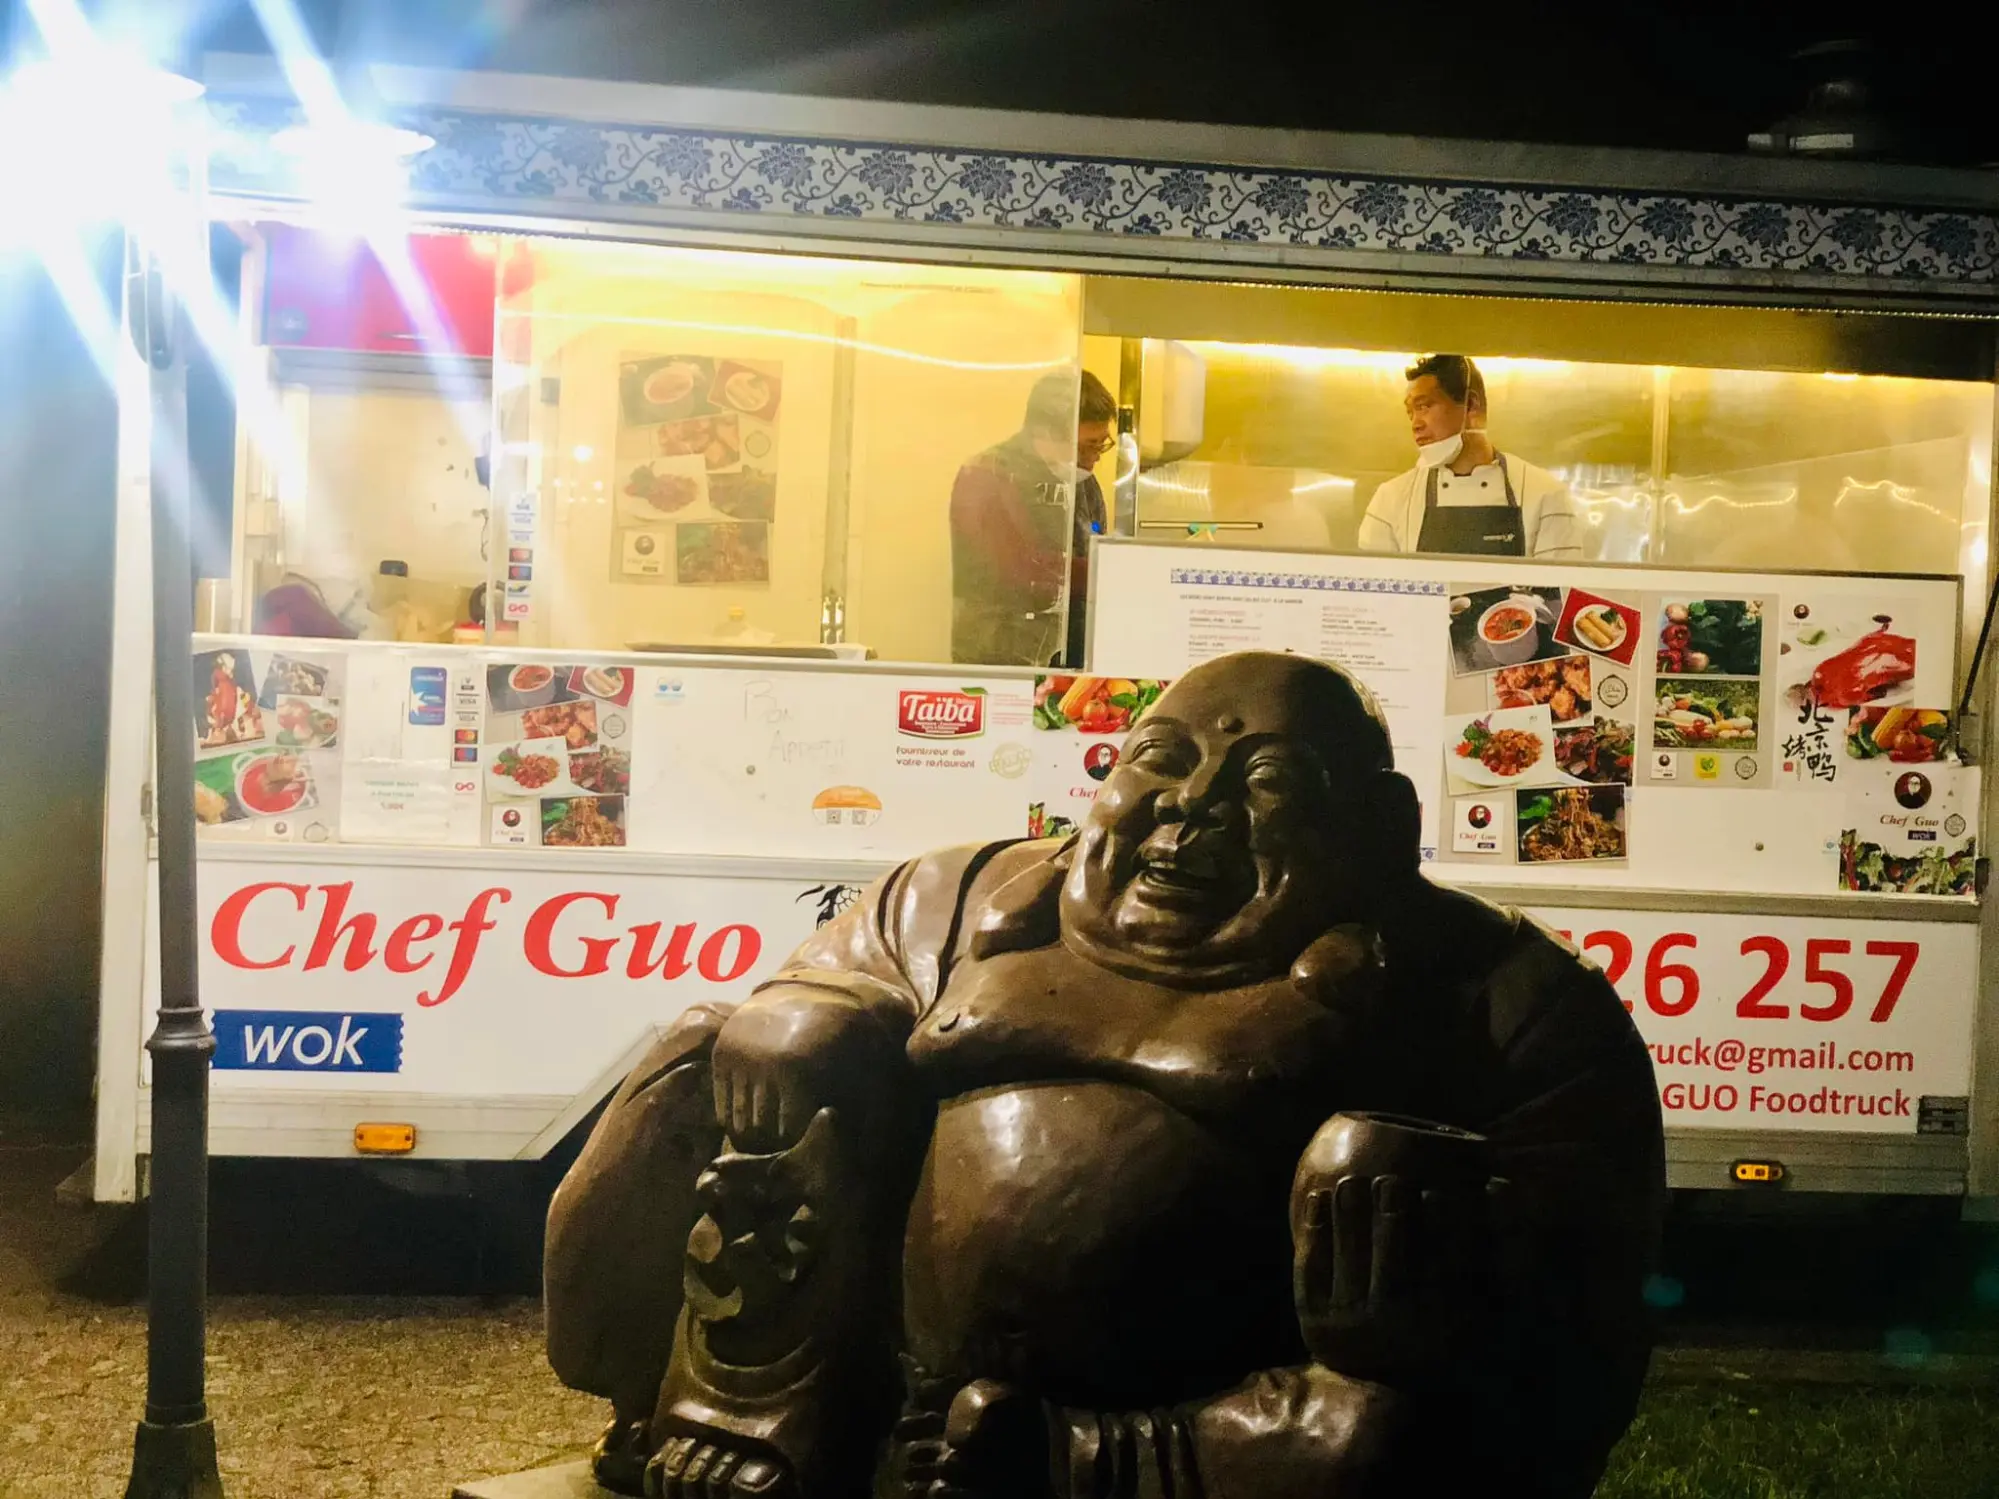 Black statue of a happy man in front of the foodtruck